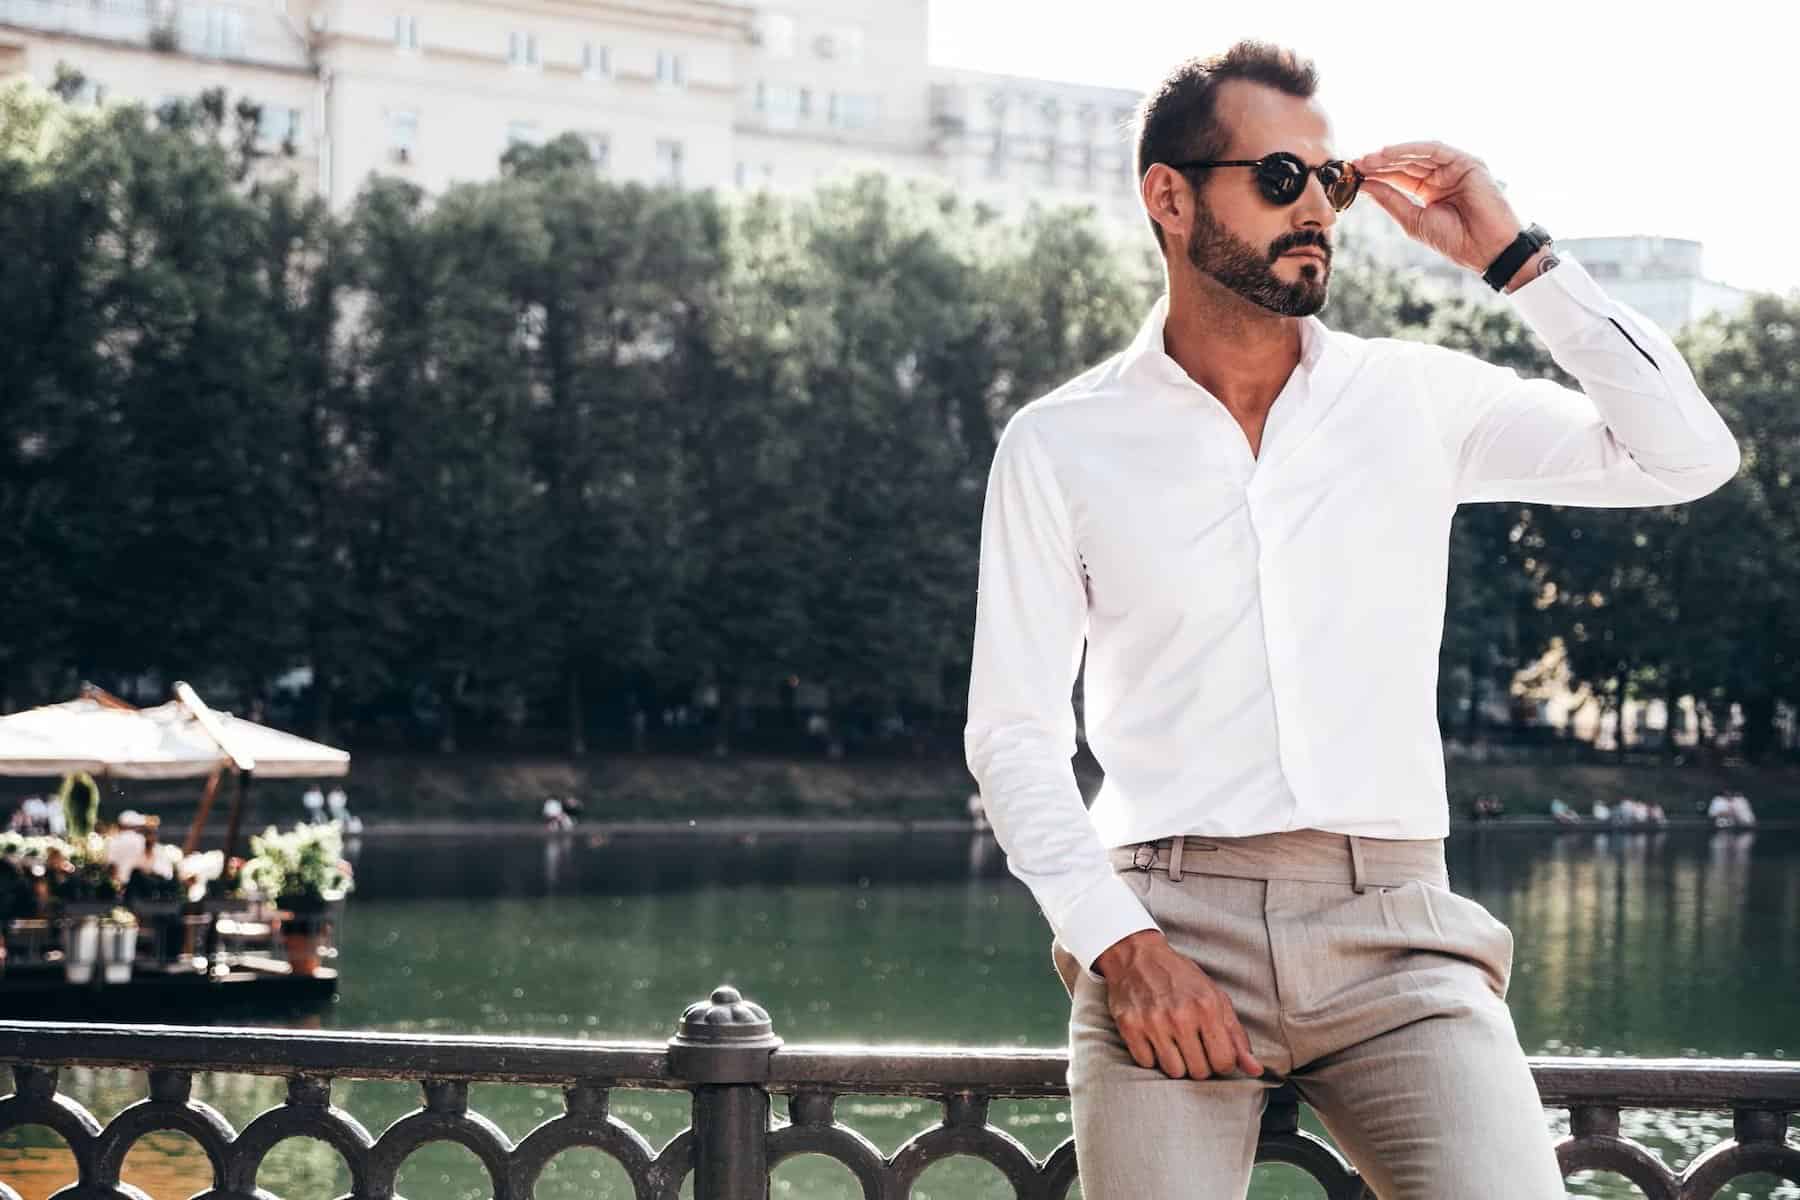 Tips For Men's Fashion and Personal Style